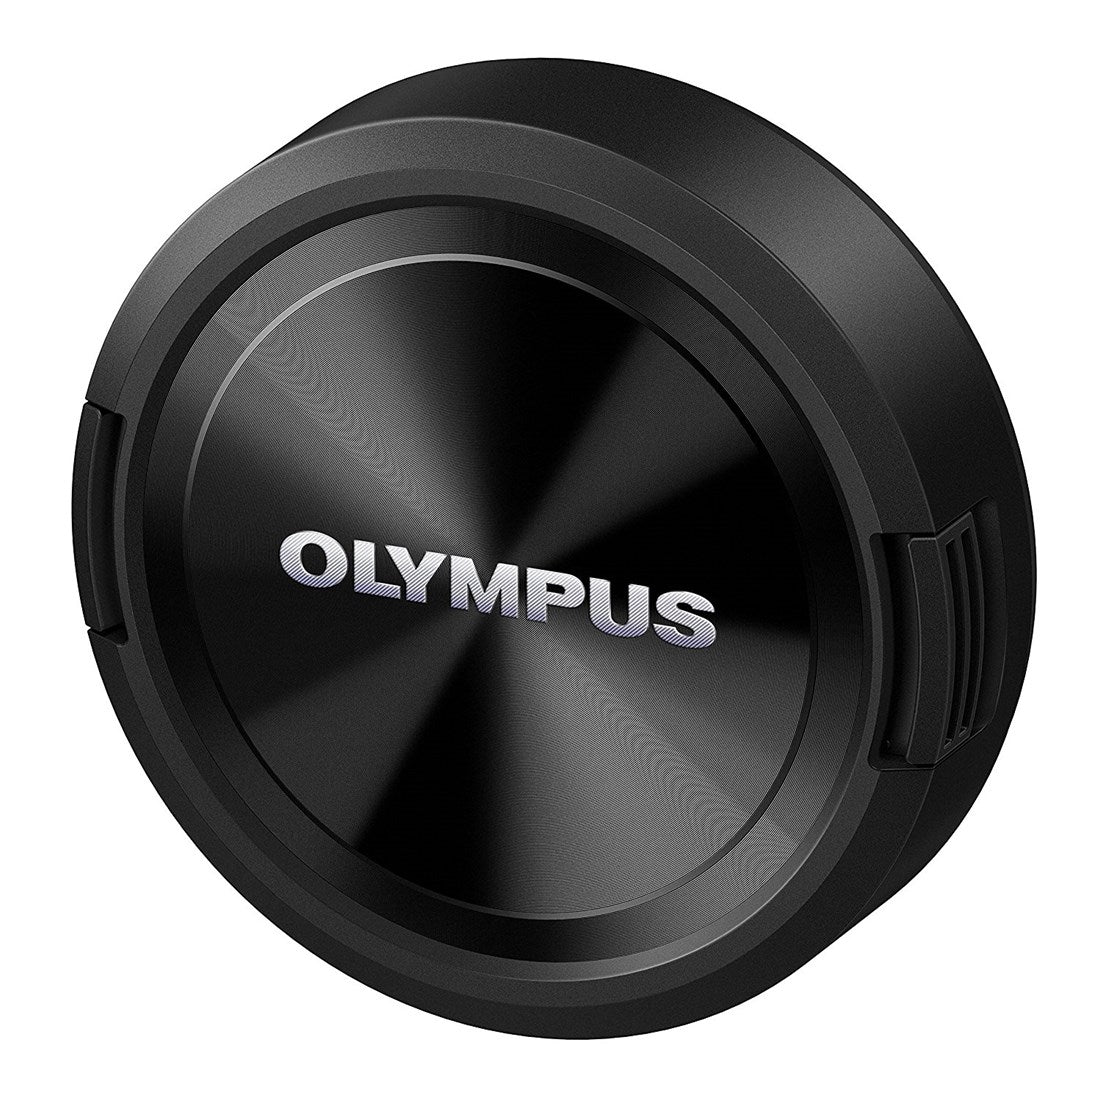 Product Image of Olympus 79mm Lens Cap for 7-14mm Pro Lens